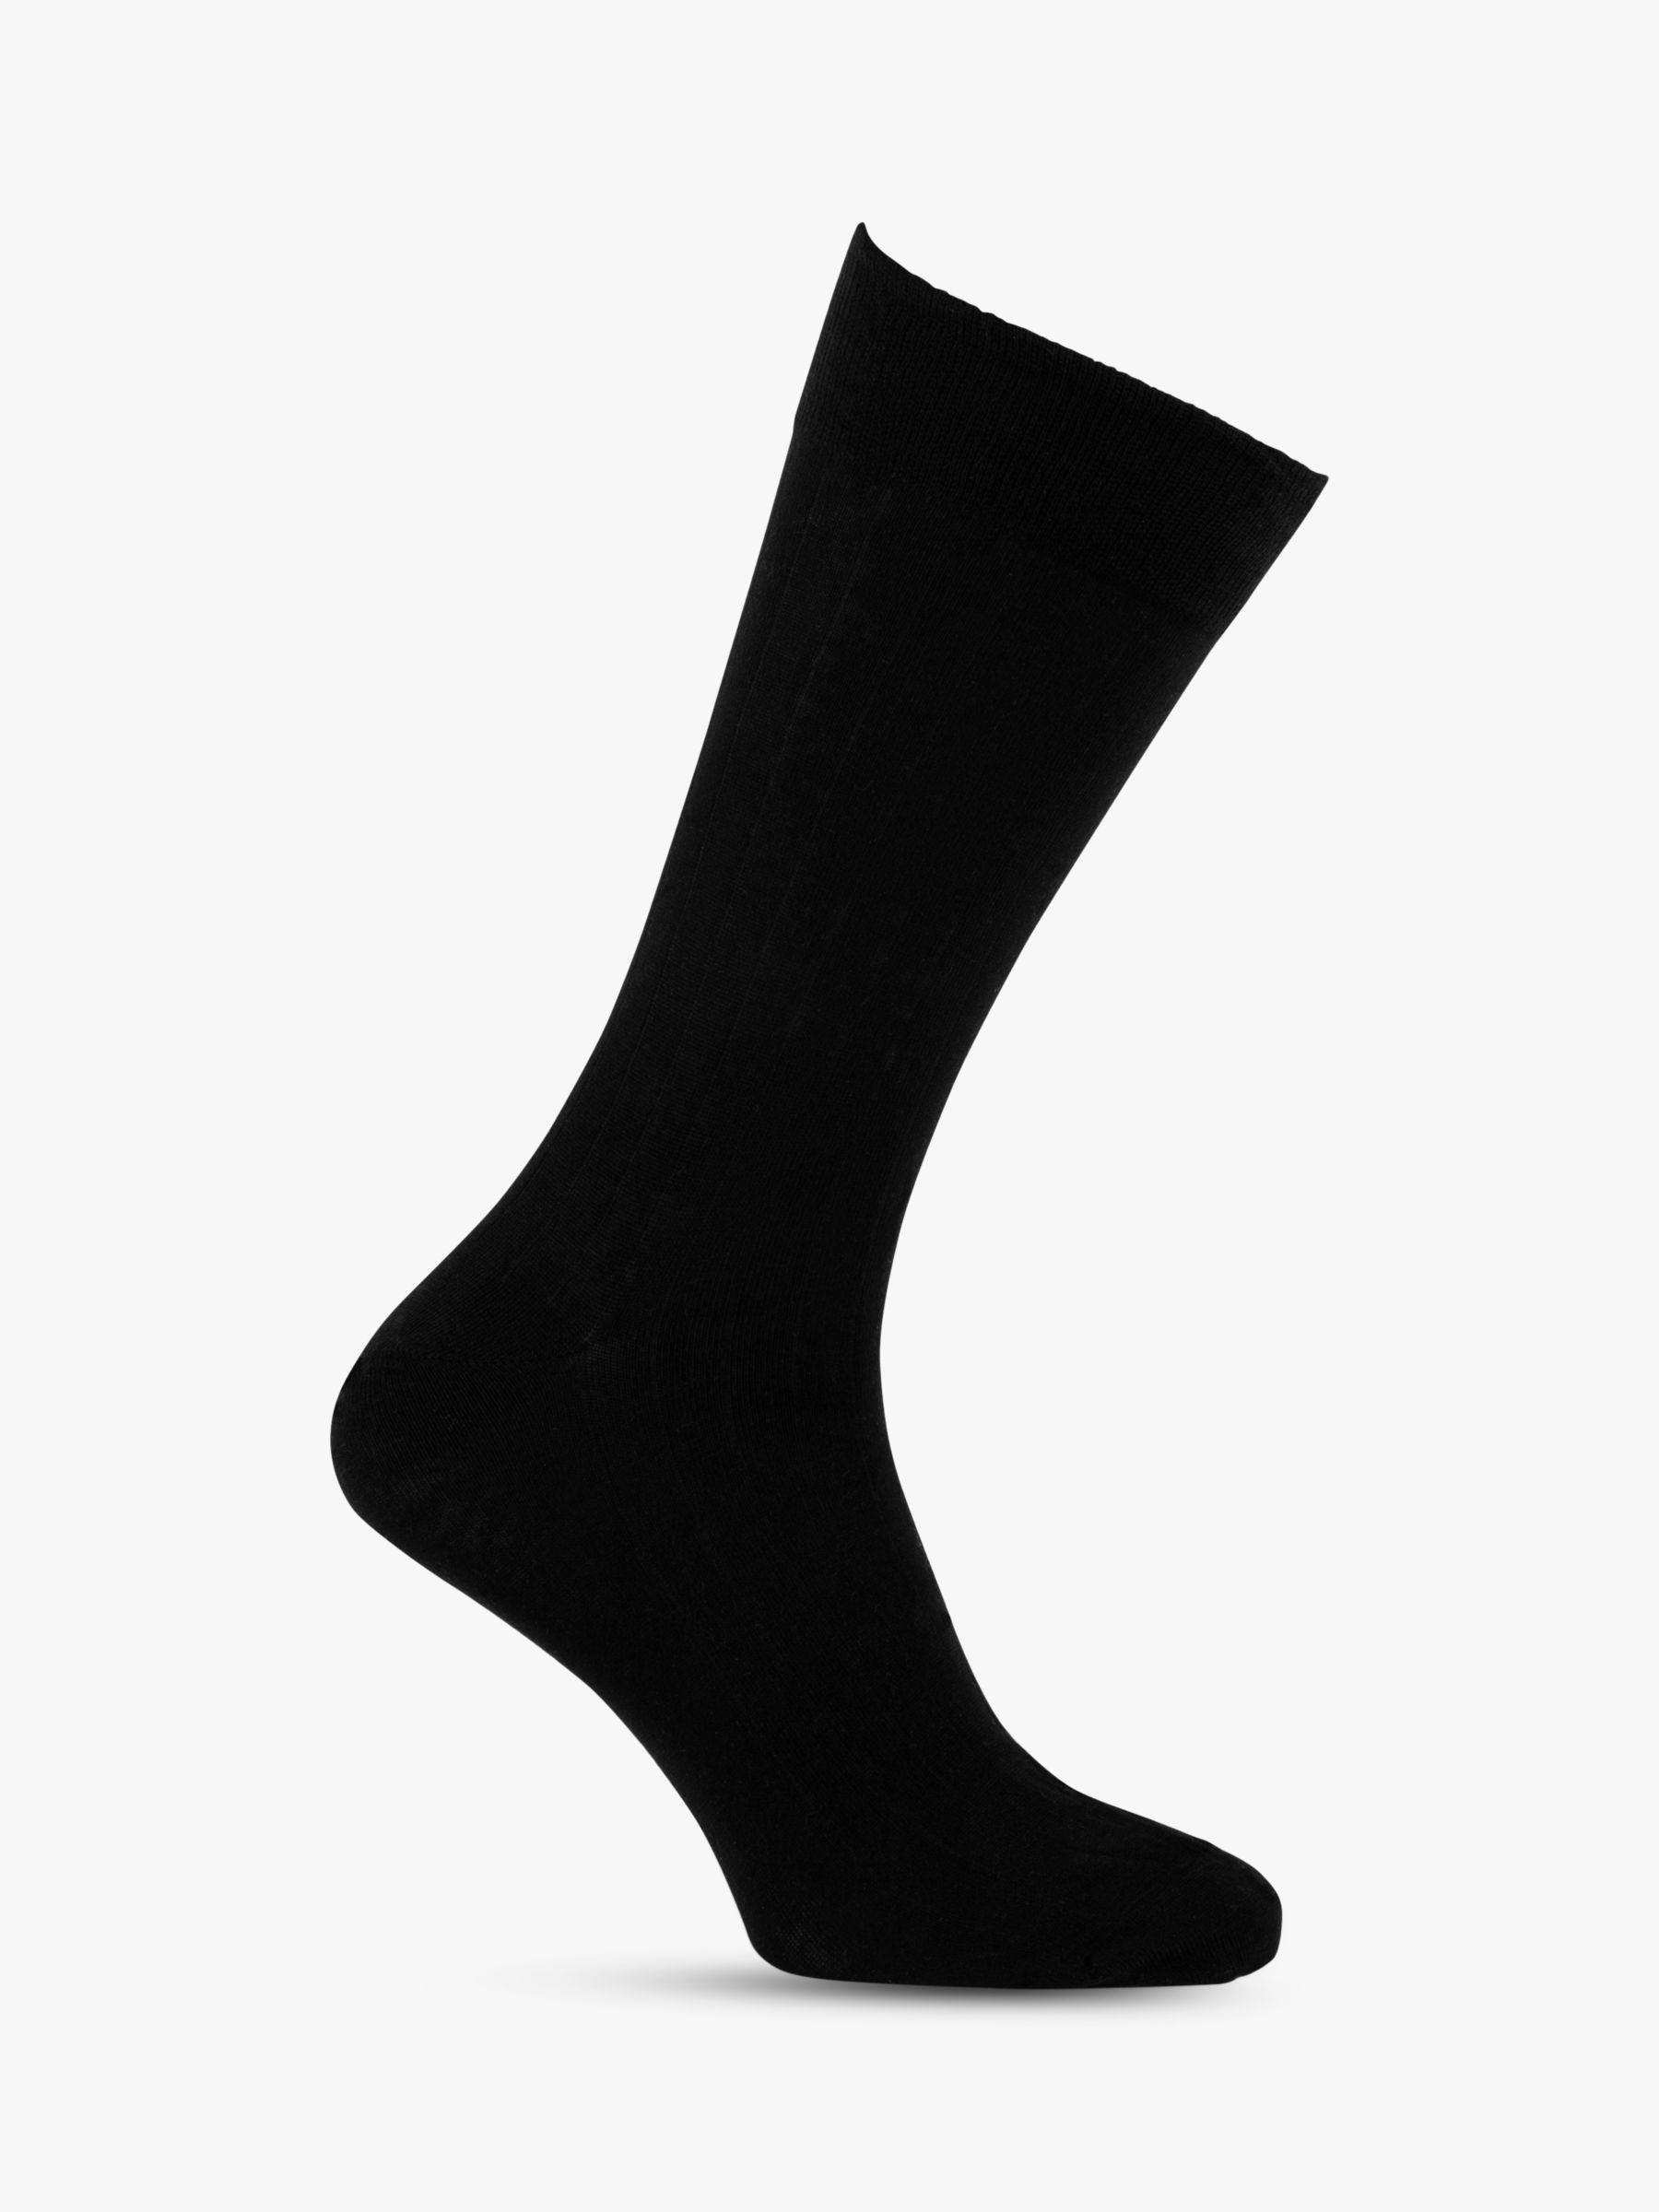 Buy totes Italian Cotton Blend Ankle Socks, Pack of 3 Online at johnlewis.com